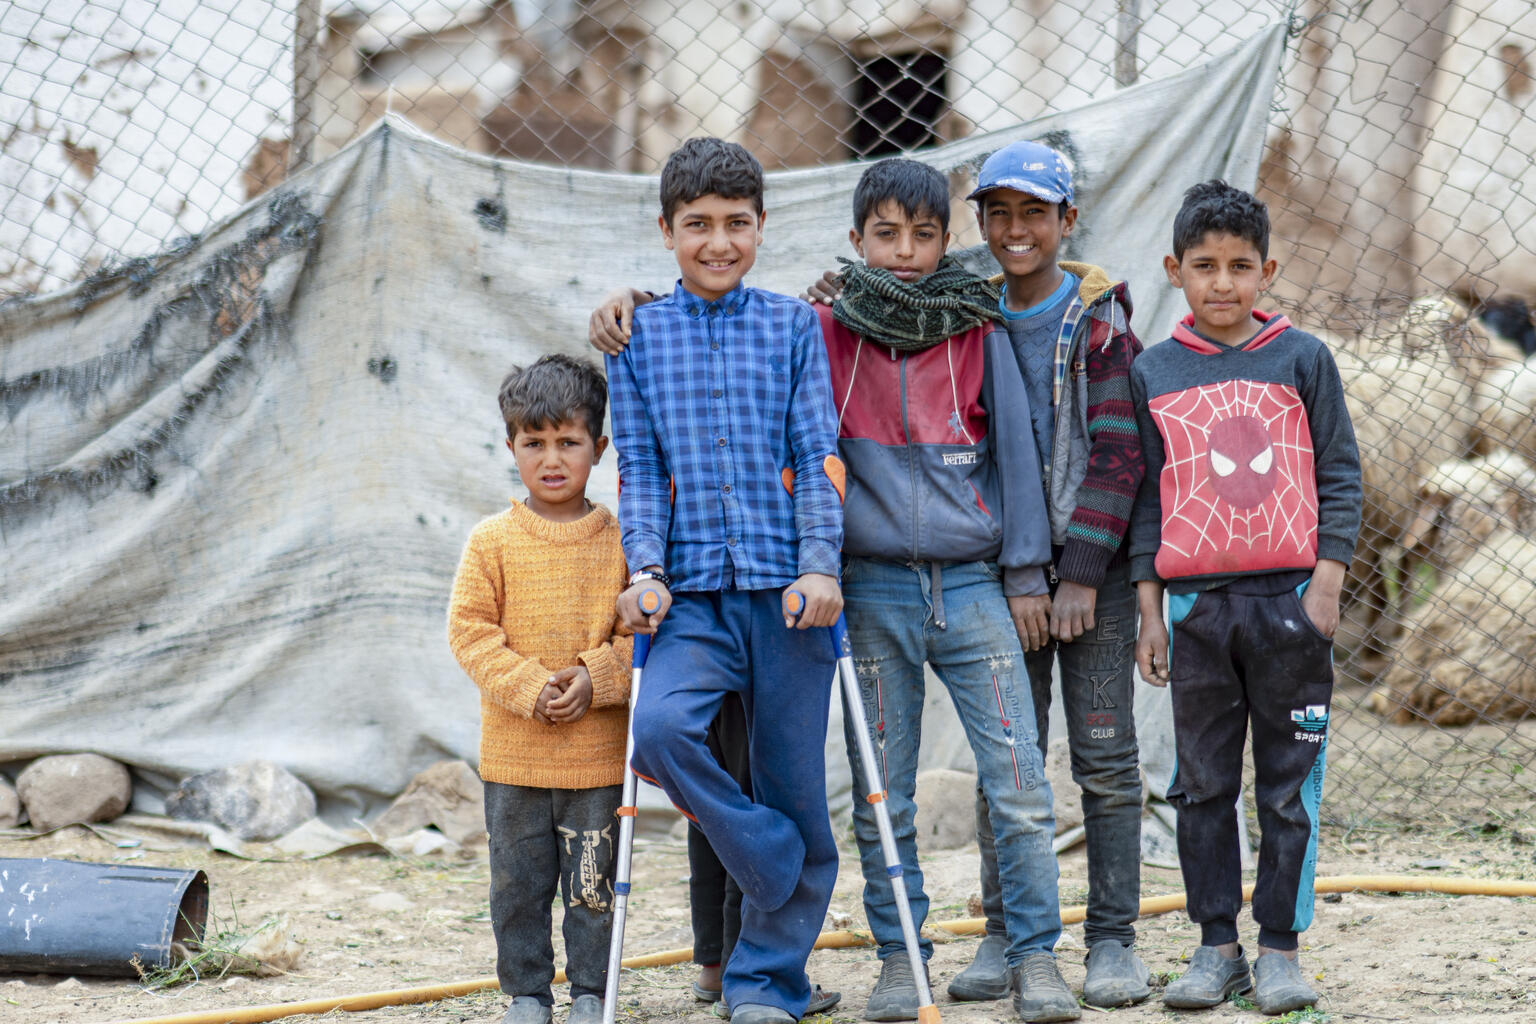 Jumaa, 12, with his friends and siblings in Abu Abdeh village, east rural Aleppo, Syria, on 19 April 2022. “I was collecting truffles with my family when I stepped on the mine,” said Jumaa, 12, recalling the time he lost his foot a year ago. Photo credit: UNICEFAdel Janji&nbsp;UN0646048